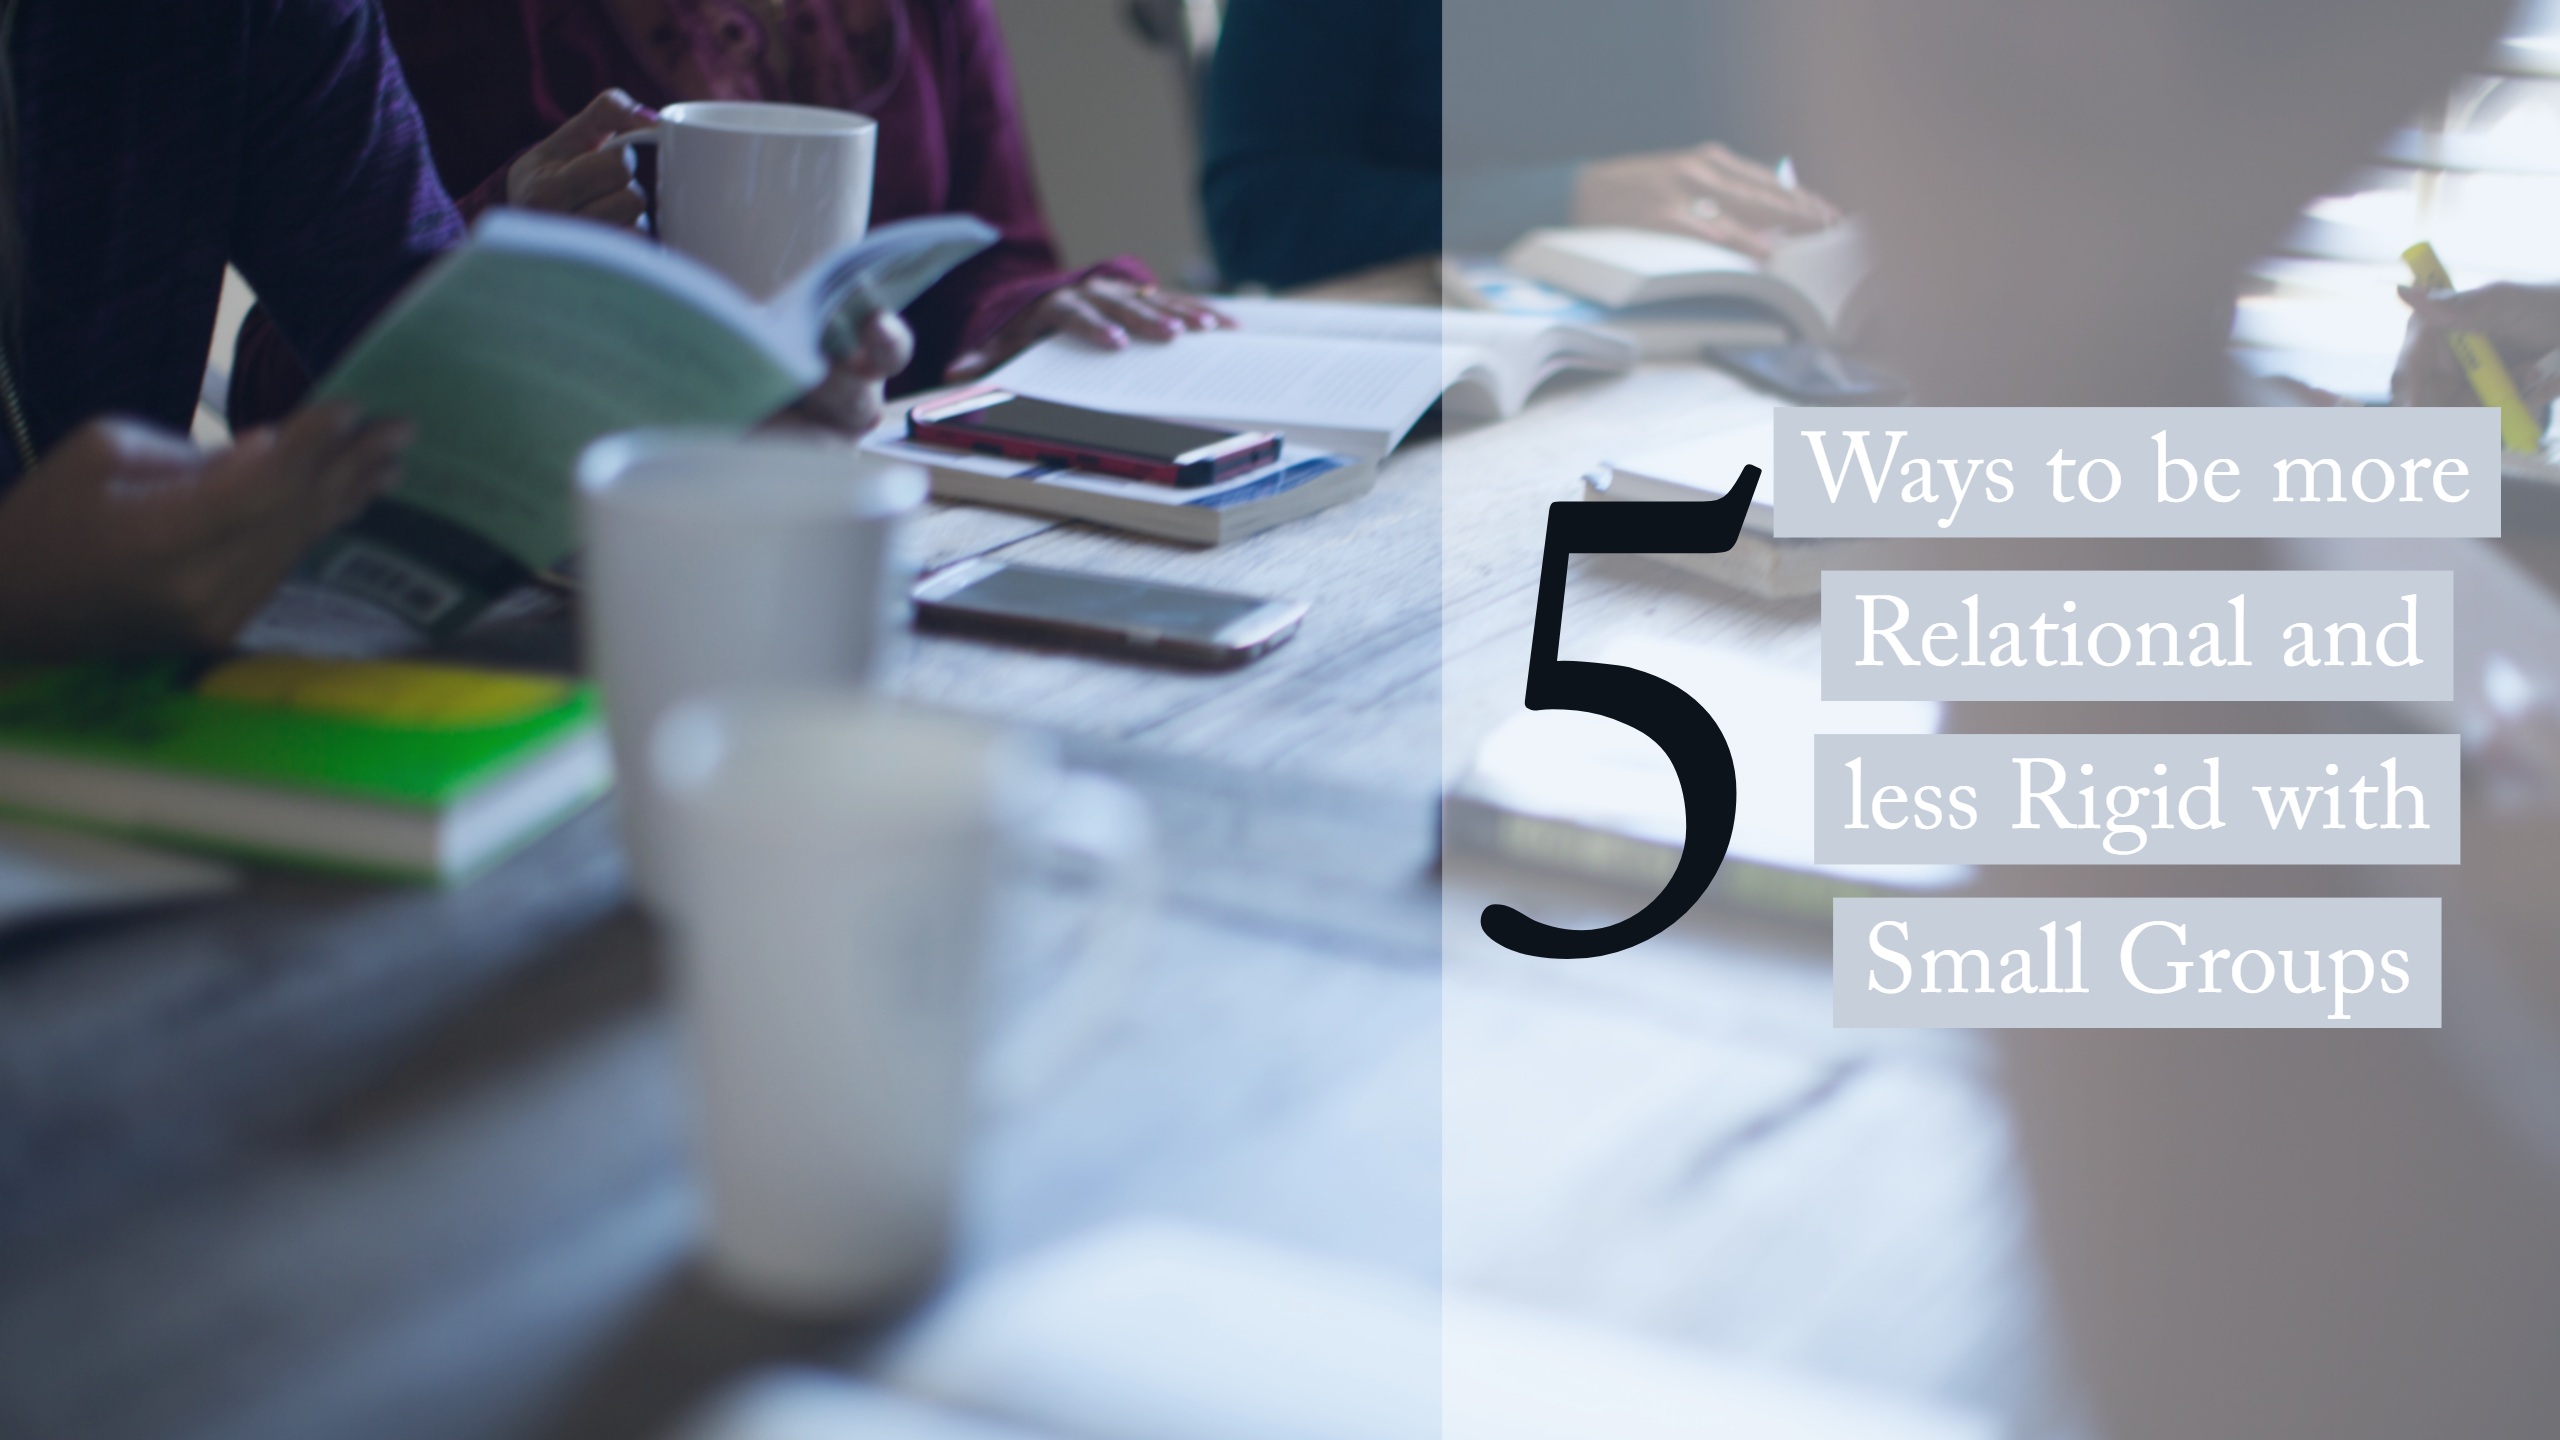 5 Ways to be more Relational and less Rigid with Small Groups